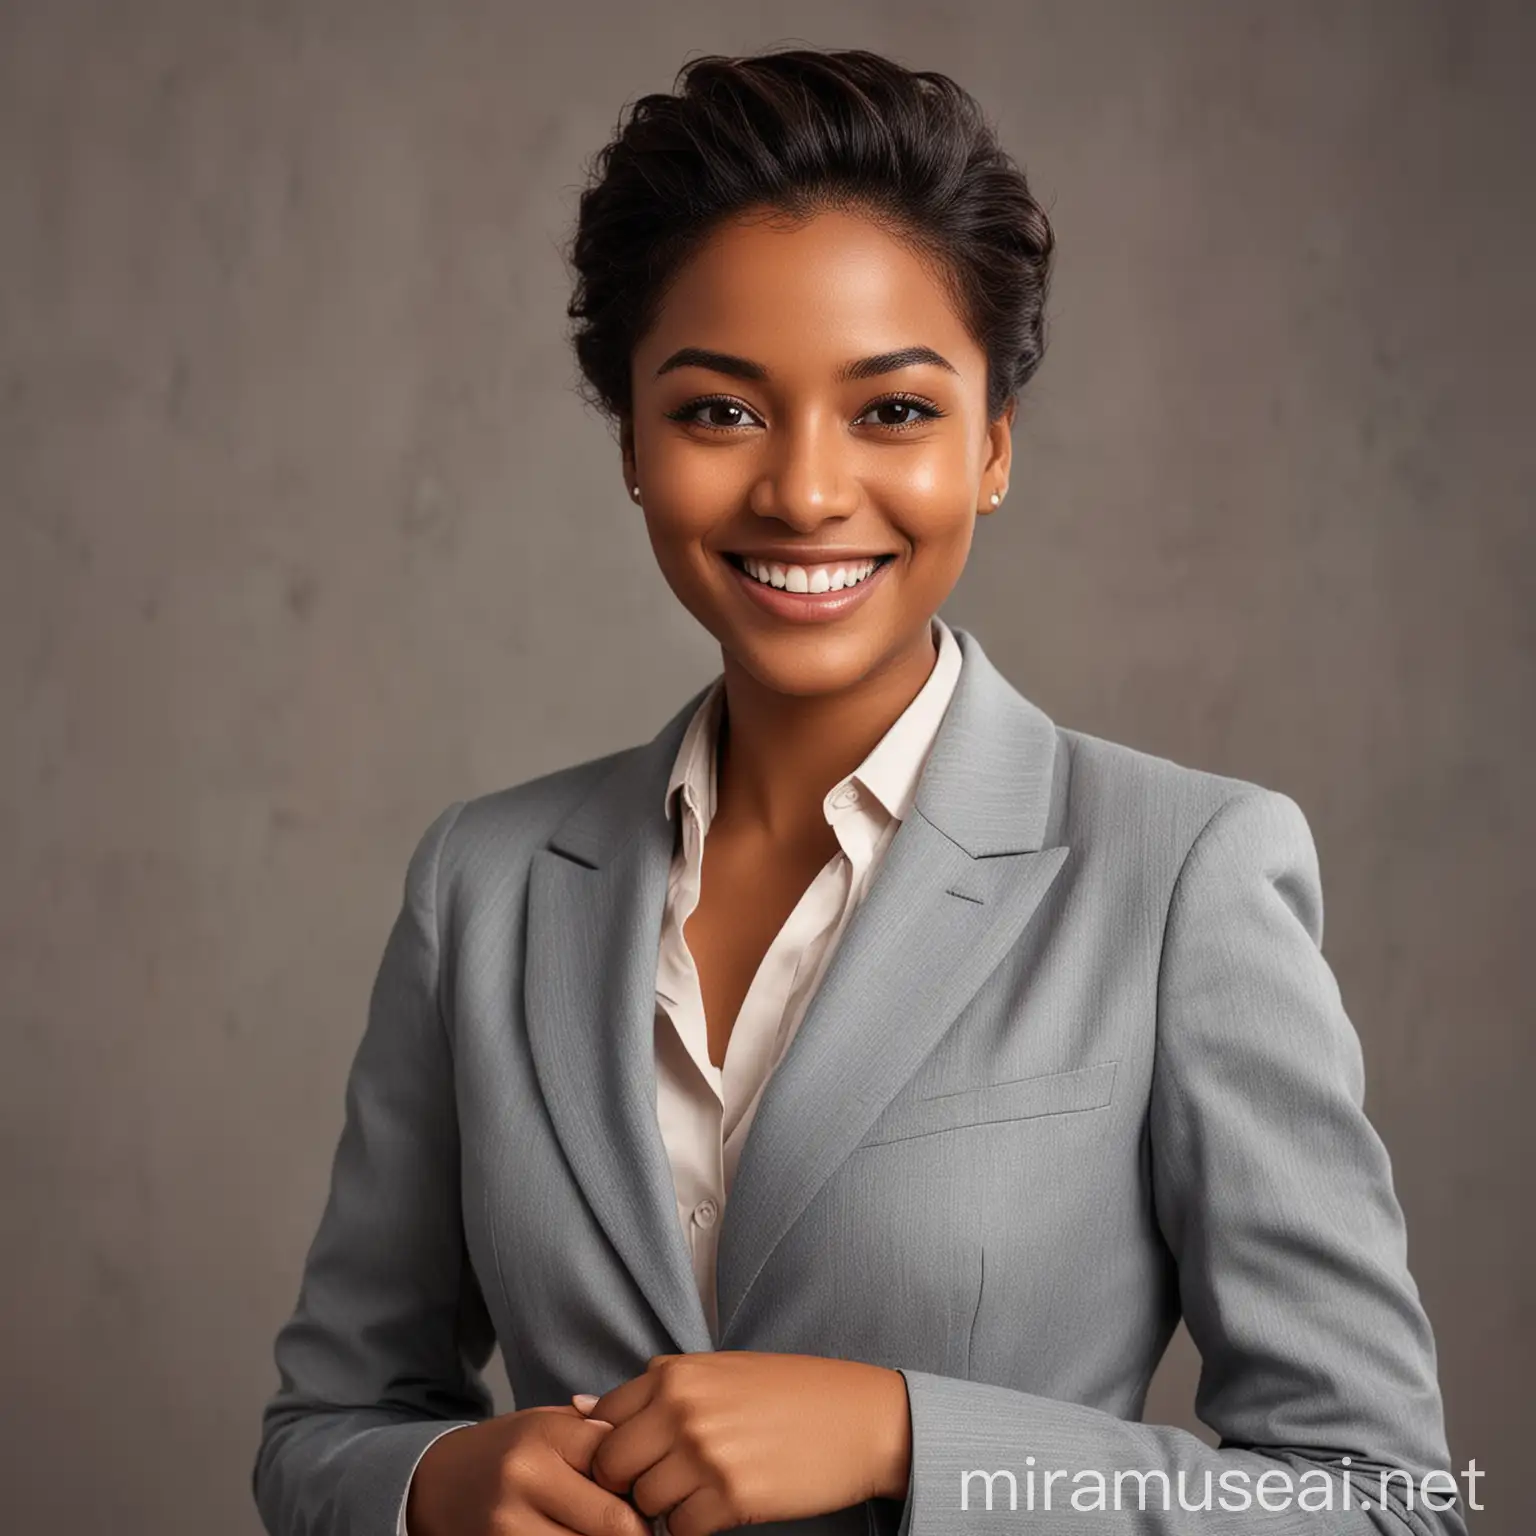 A professional lady that possesses brown skin with a grey suit and a smiling face